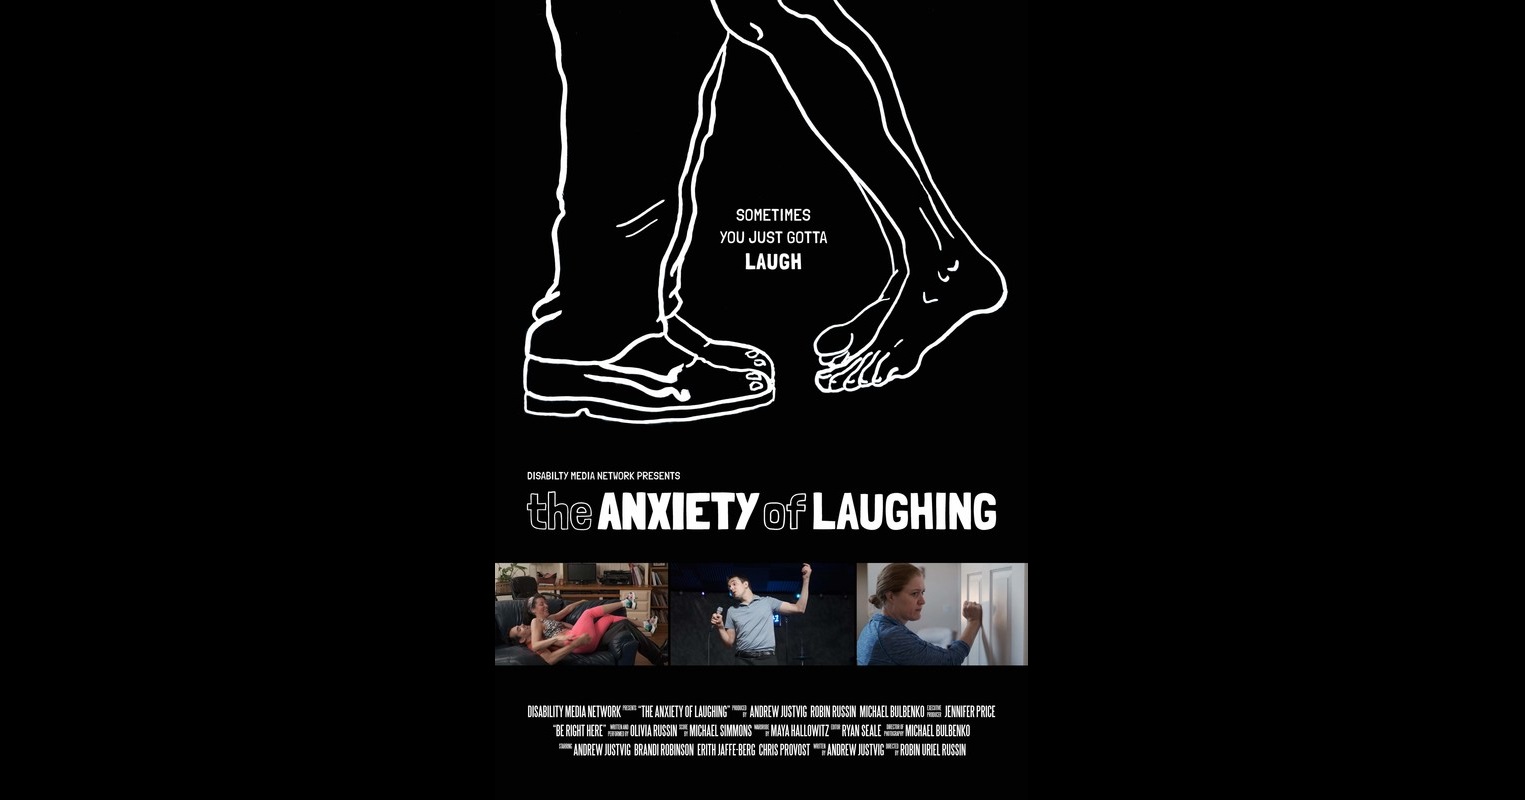 The anxiety of Laughing